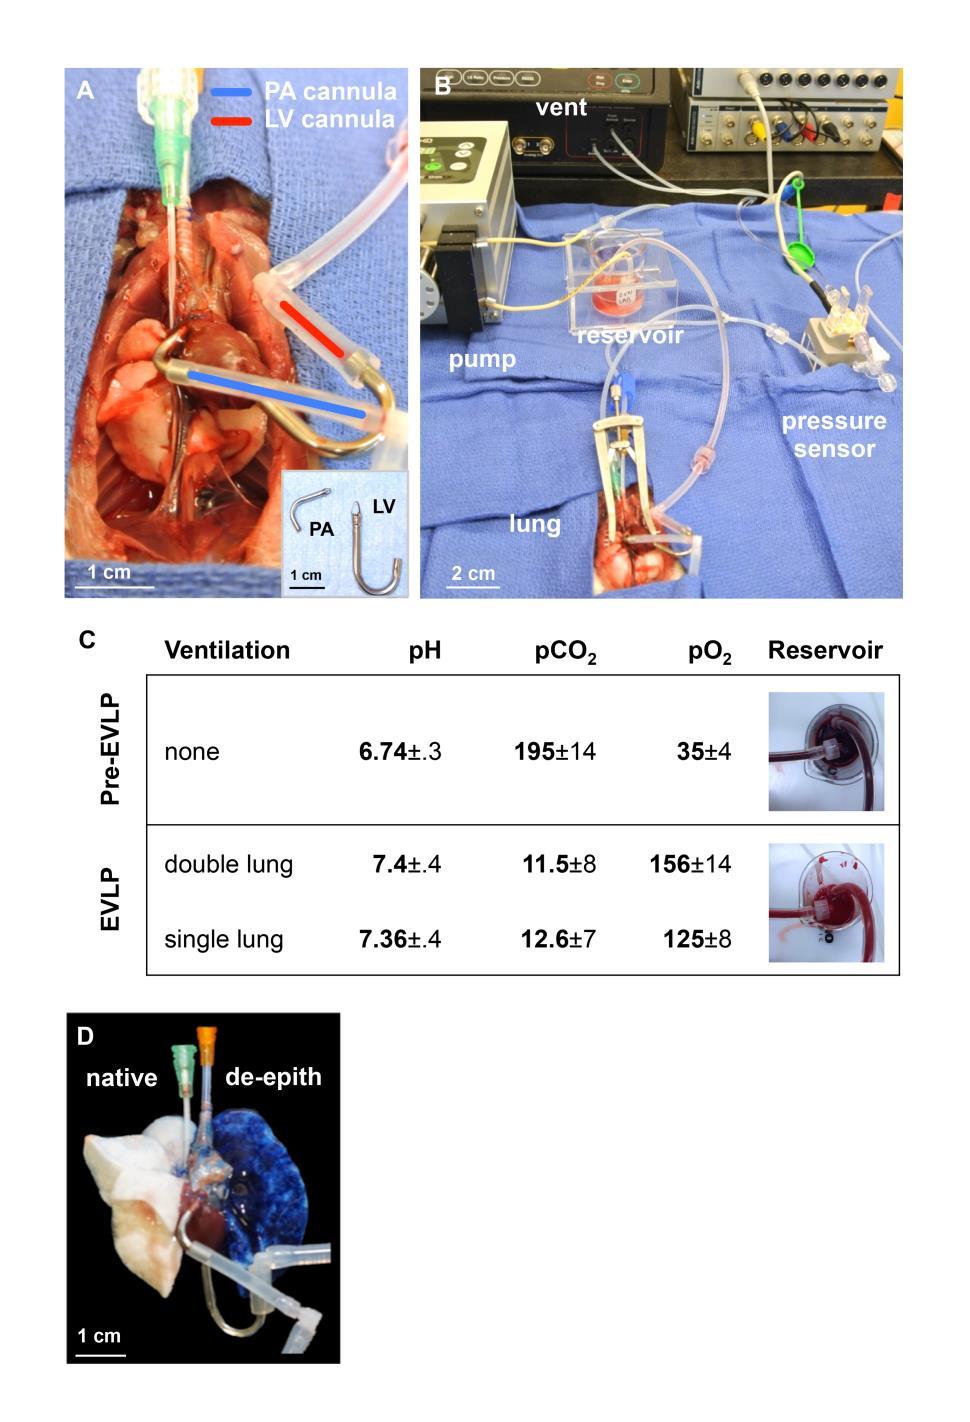 fig. S1. Lung de-epithelialization. (A) Double lung cannulation demonstrating Pulmonary Artery (PA) cannula (blue) and Left Ventricle (LV) cannula (red).